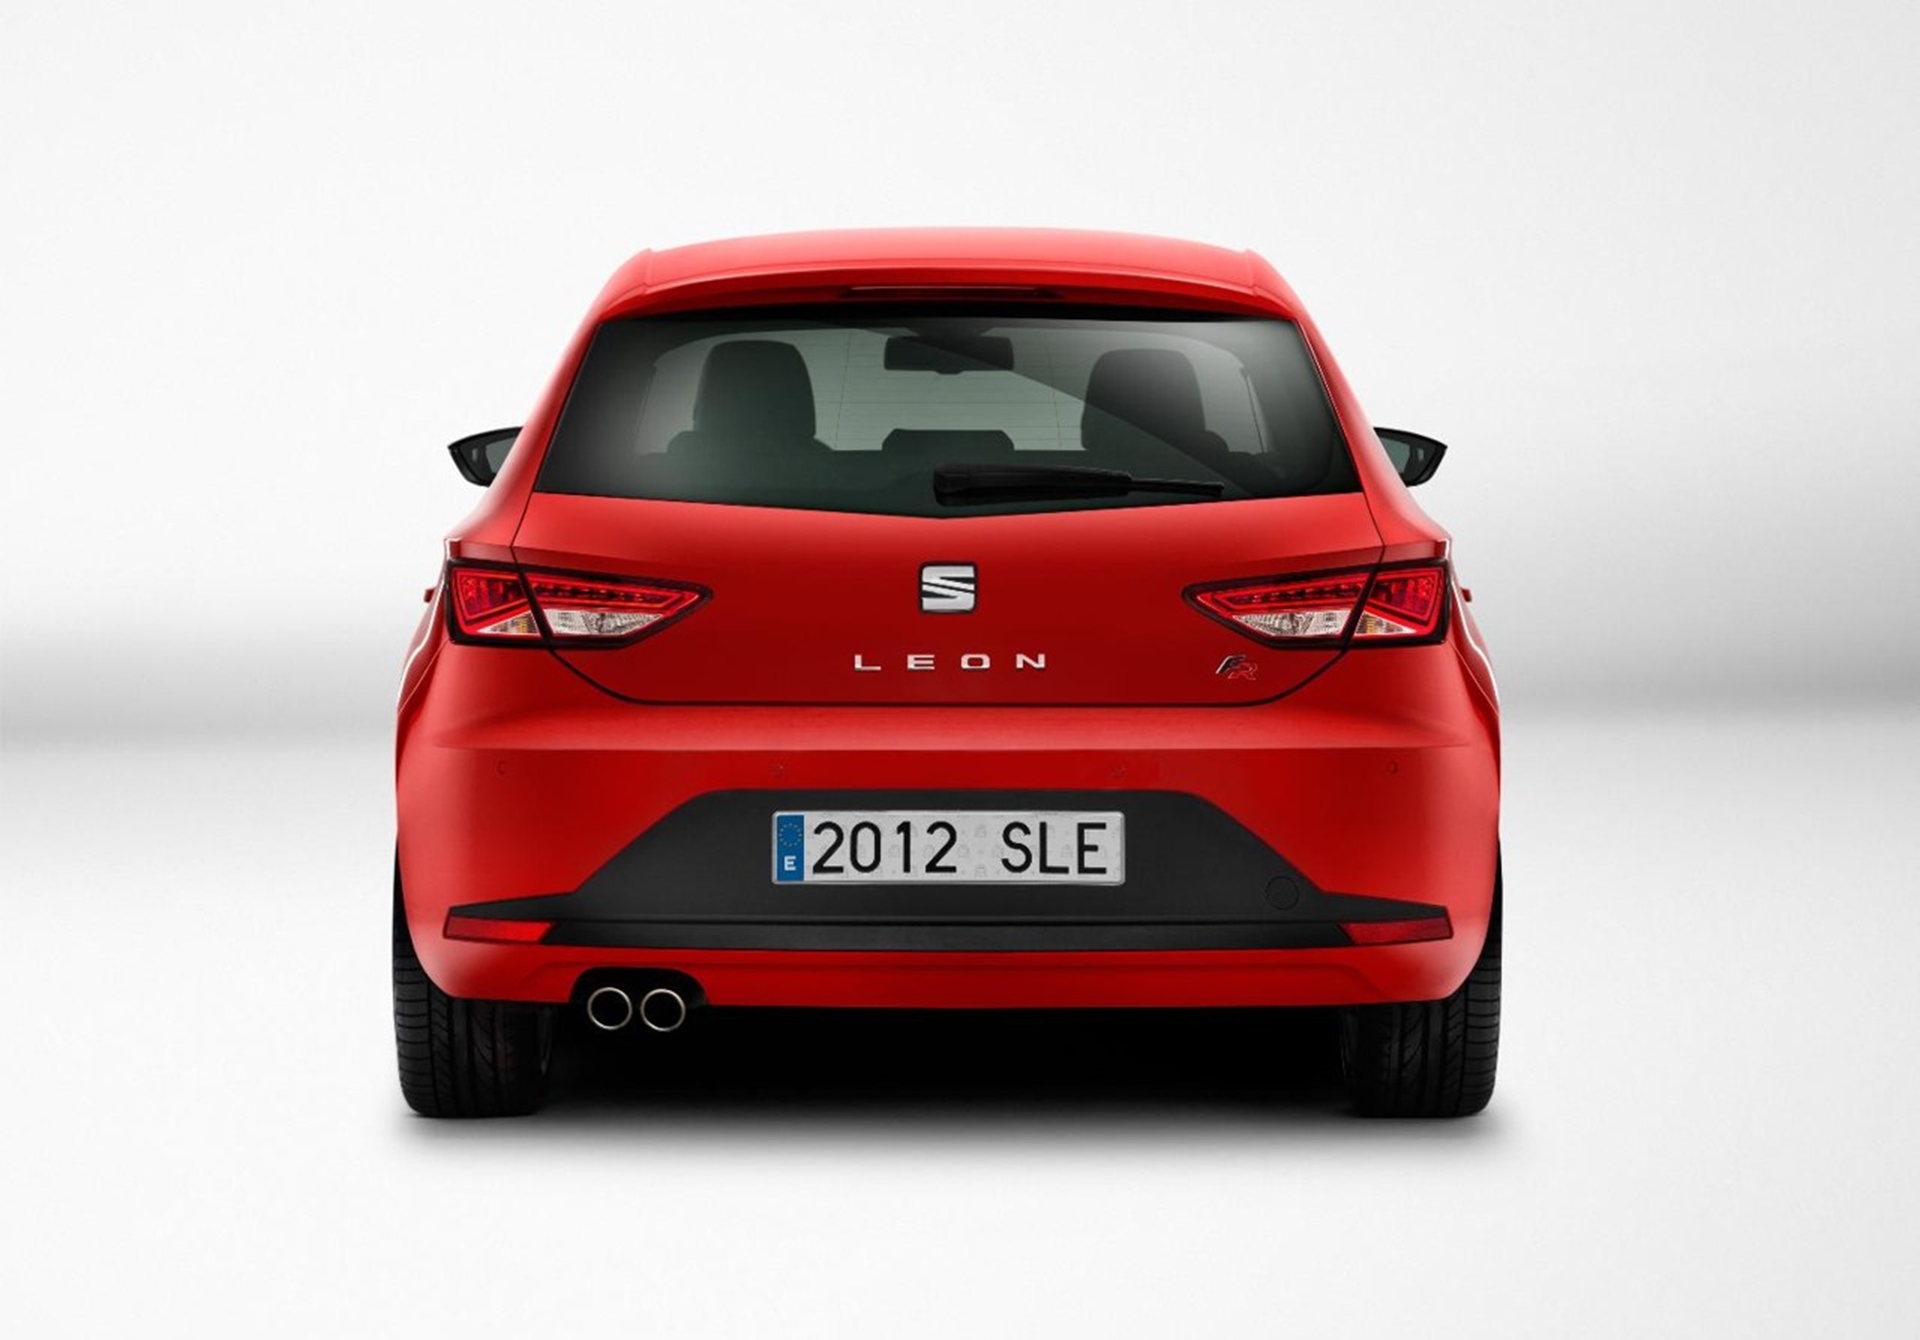 THE NEW SEAT LEON: WHERE DESIGN MEETS TECHNOLOGY